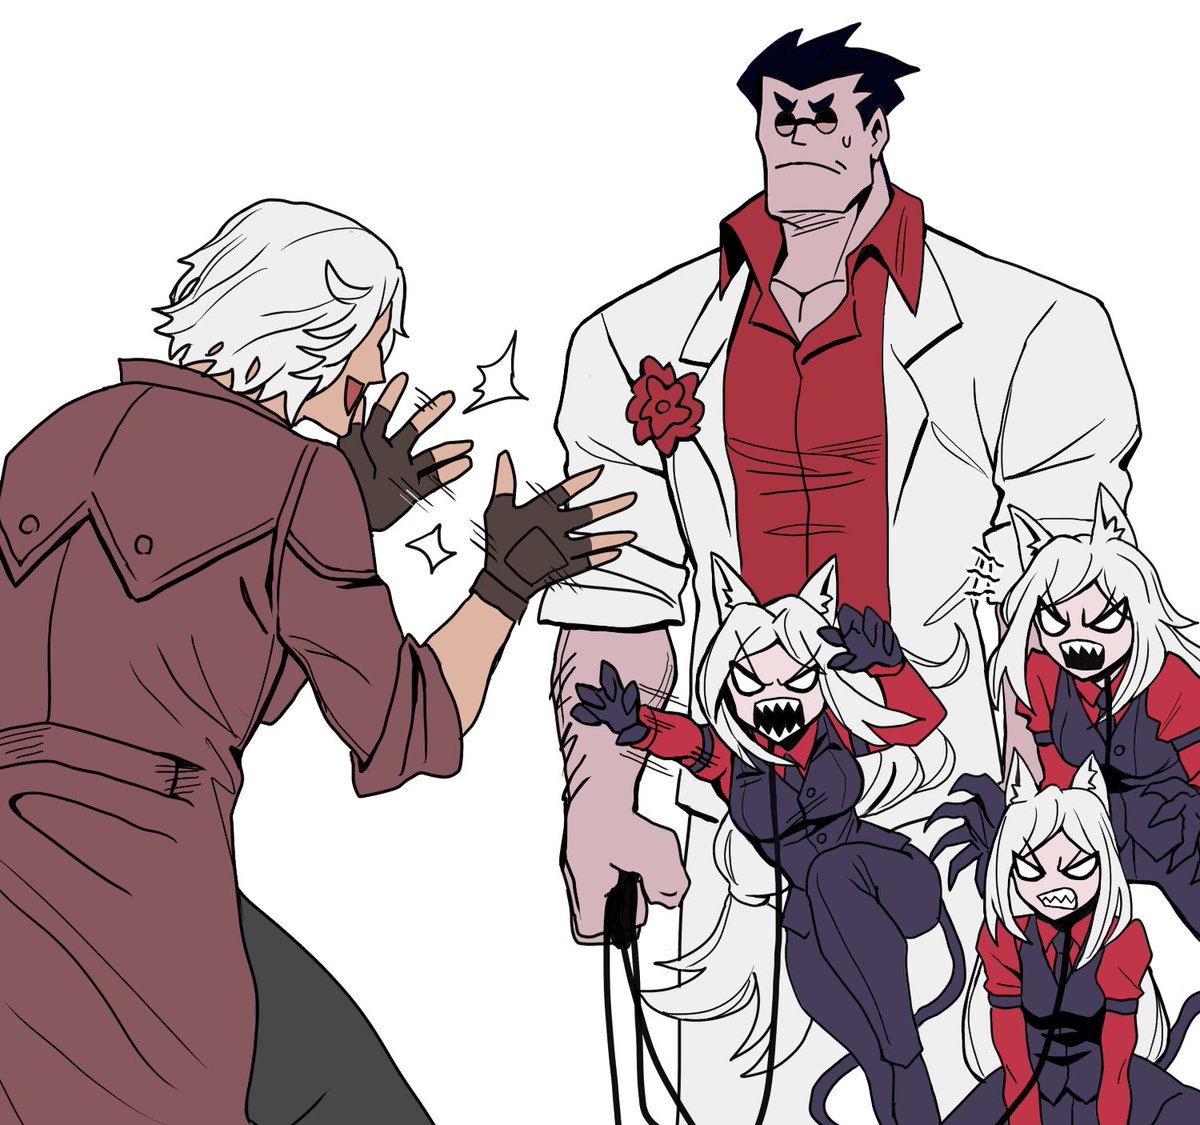 "Helltaker x Devil May Cry That would be an interesting crossover IMO." via @FigmoeLurker